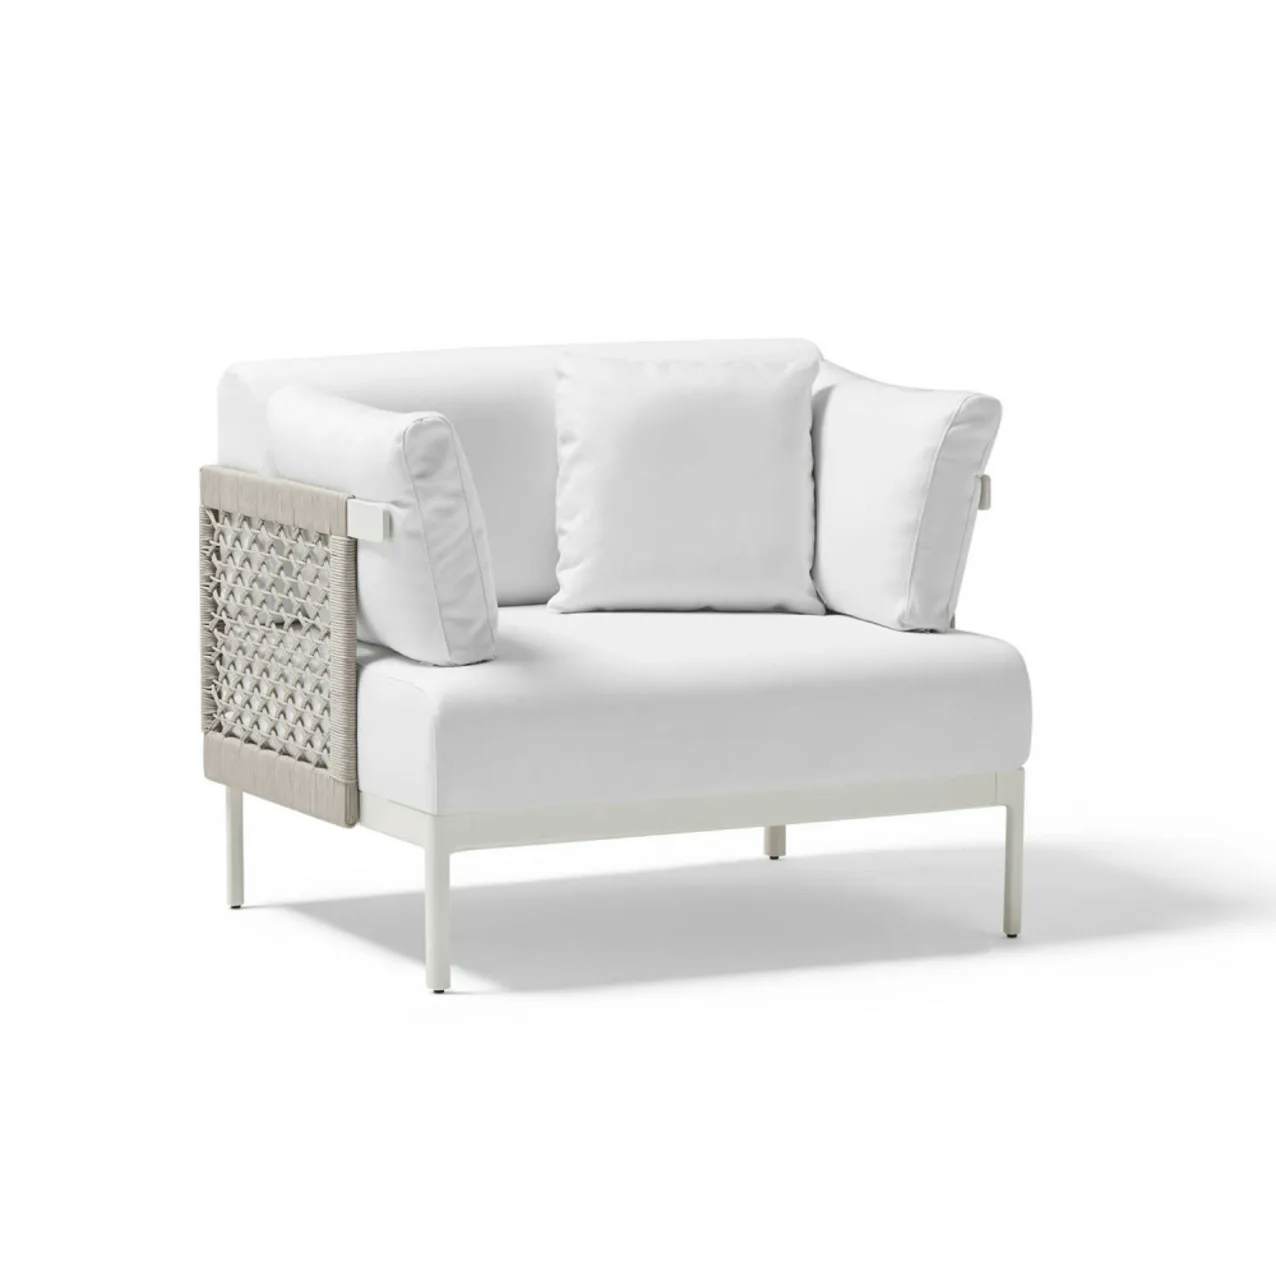 POINT Legacy Lounge Chair (Rope Panels) | Mineral White Powder-Coated Aluminum Frame | Rope Panels